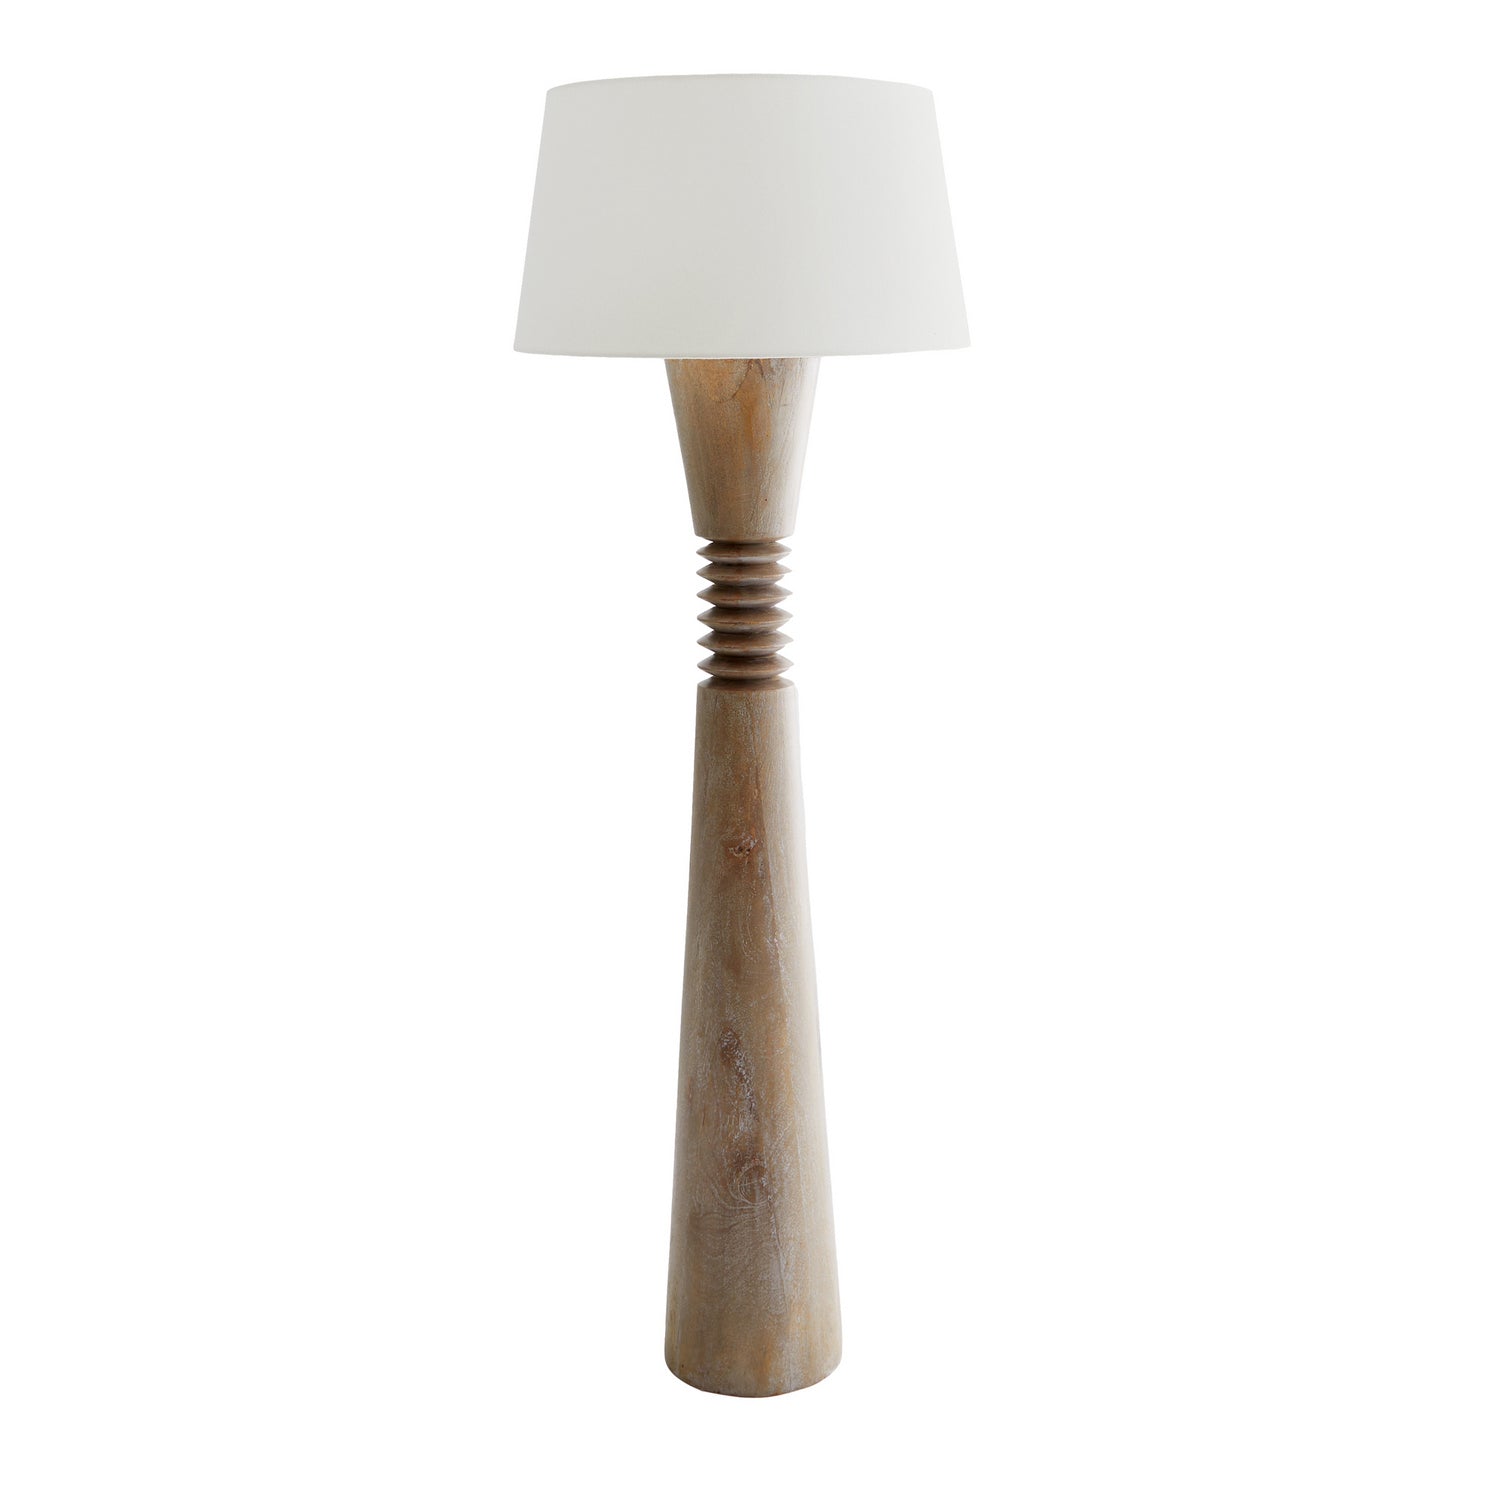 One Light Floor Lamp from the Sedona collection in Cerused Oak finish